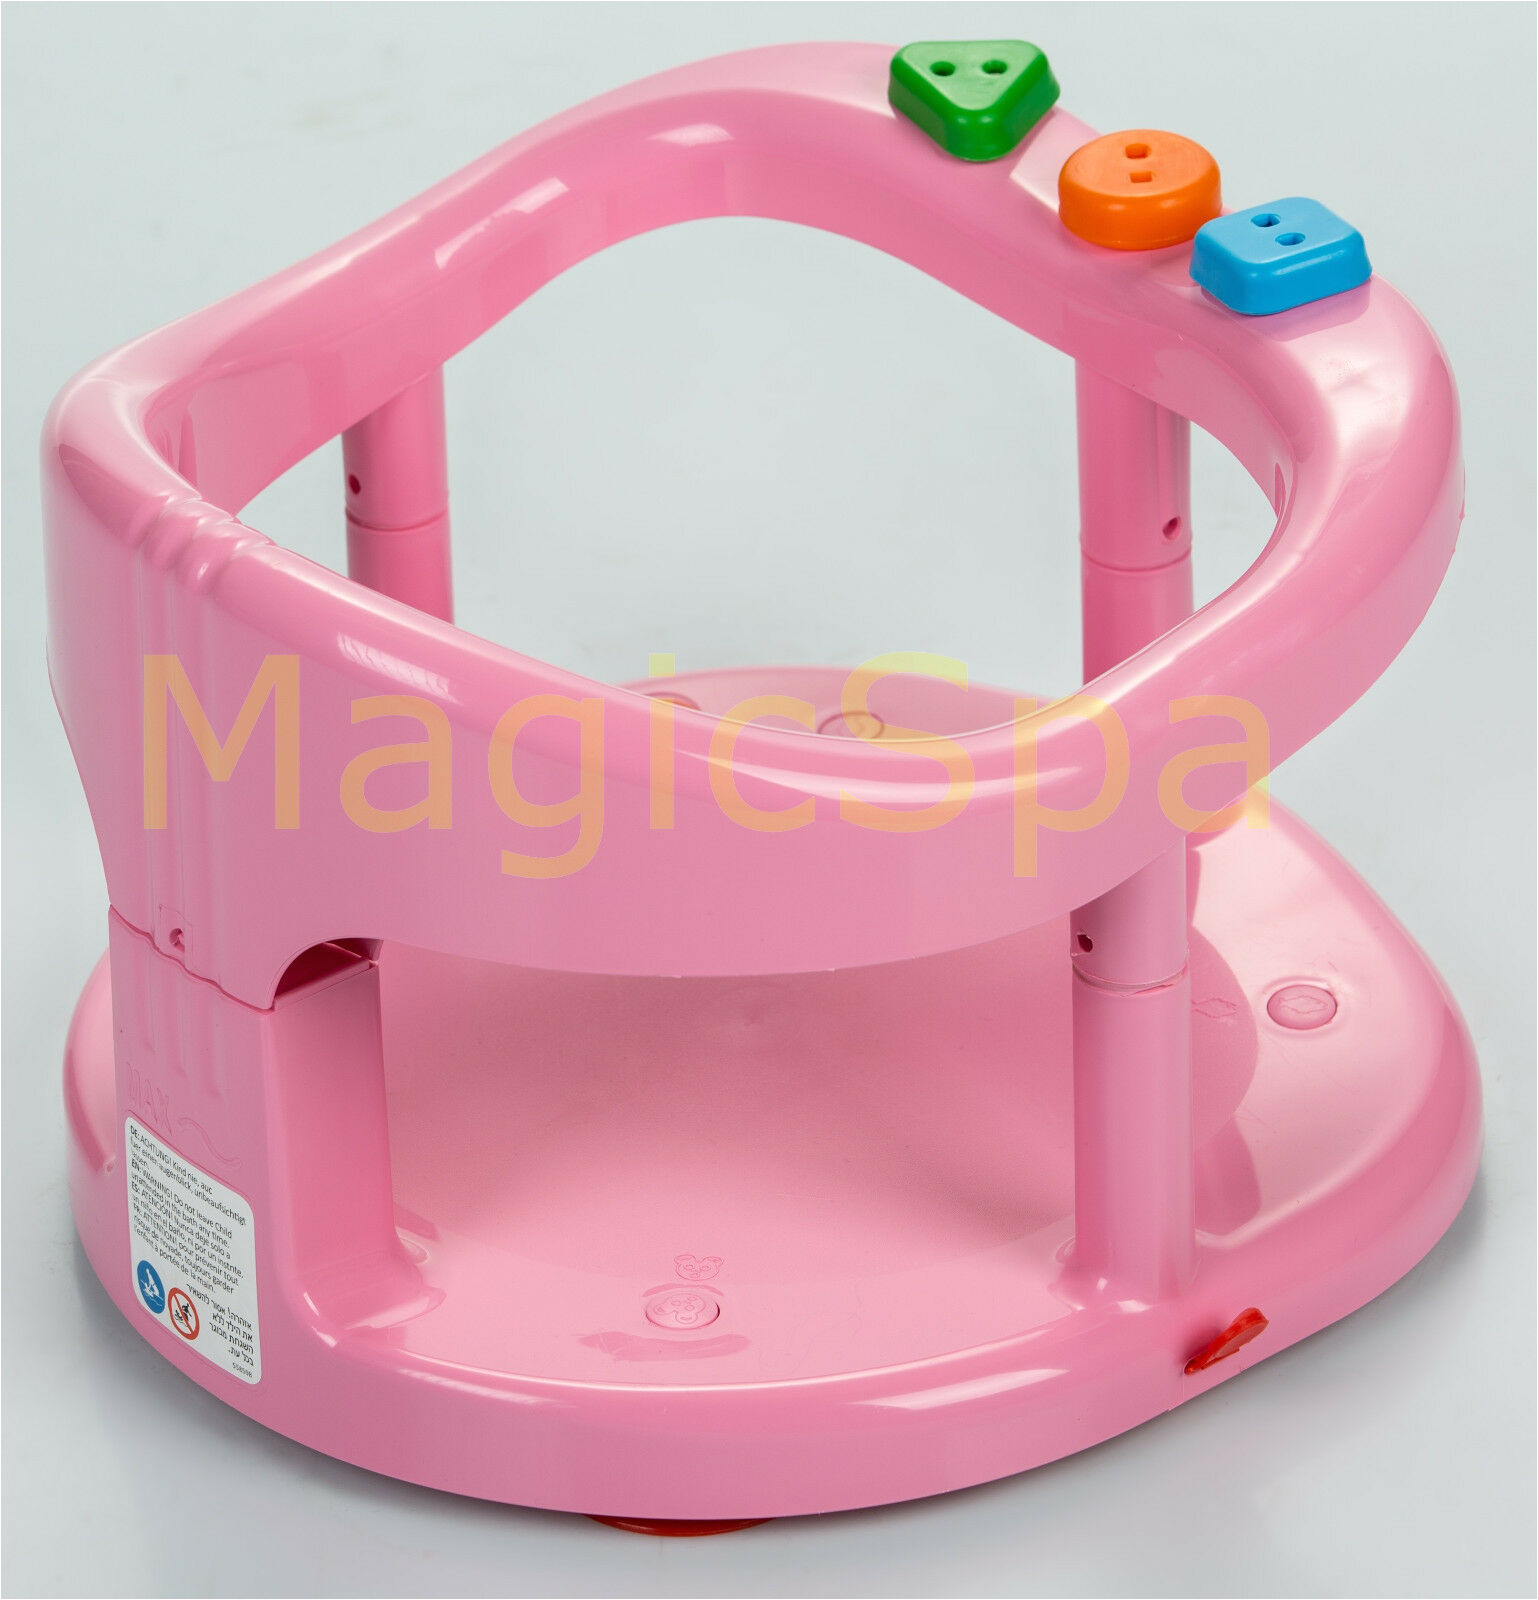 Baby Bath Ring Seat for Tub by Keter Infant Baby Bath Tub Ring Seat Keter Pink Fast Shipping